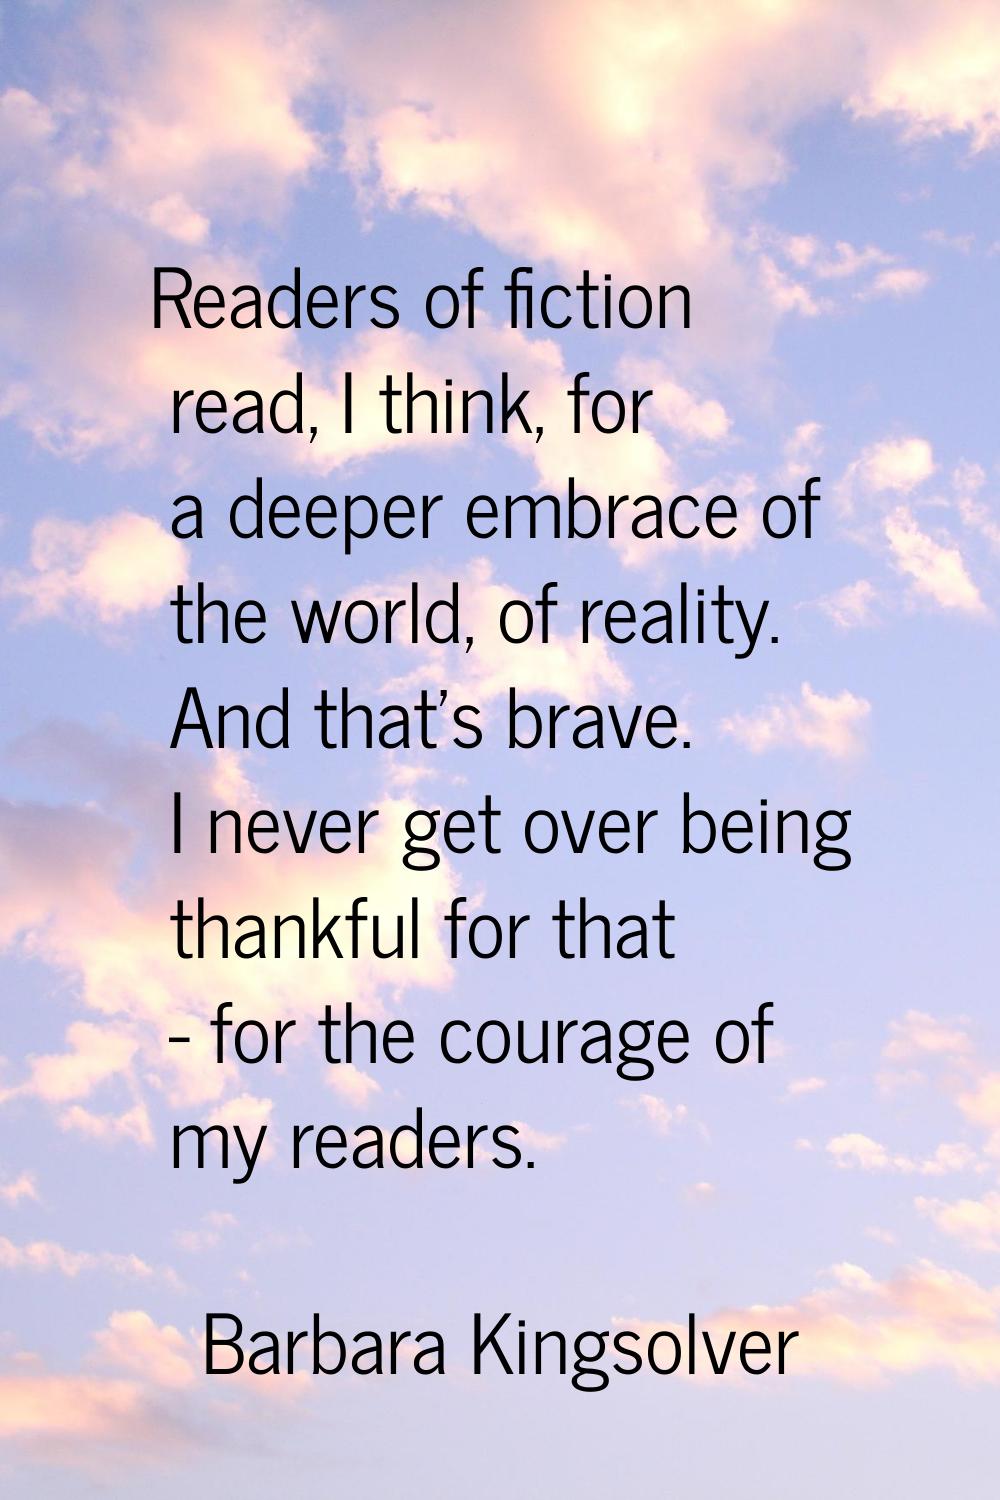 Readers of fiction read, I think, for a deeper embrace of the world, of reality. And that's brave. 